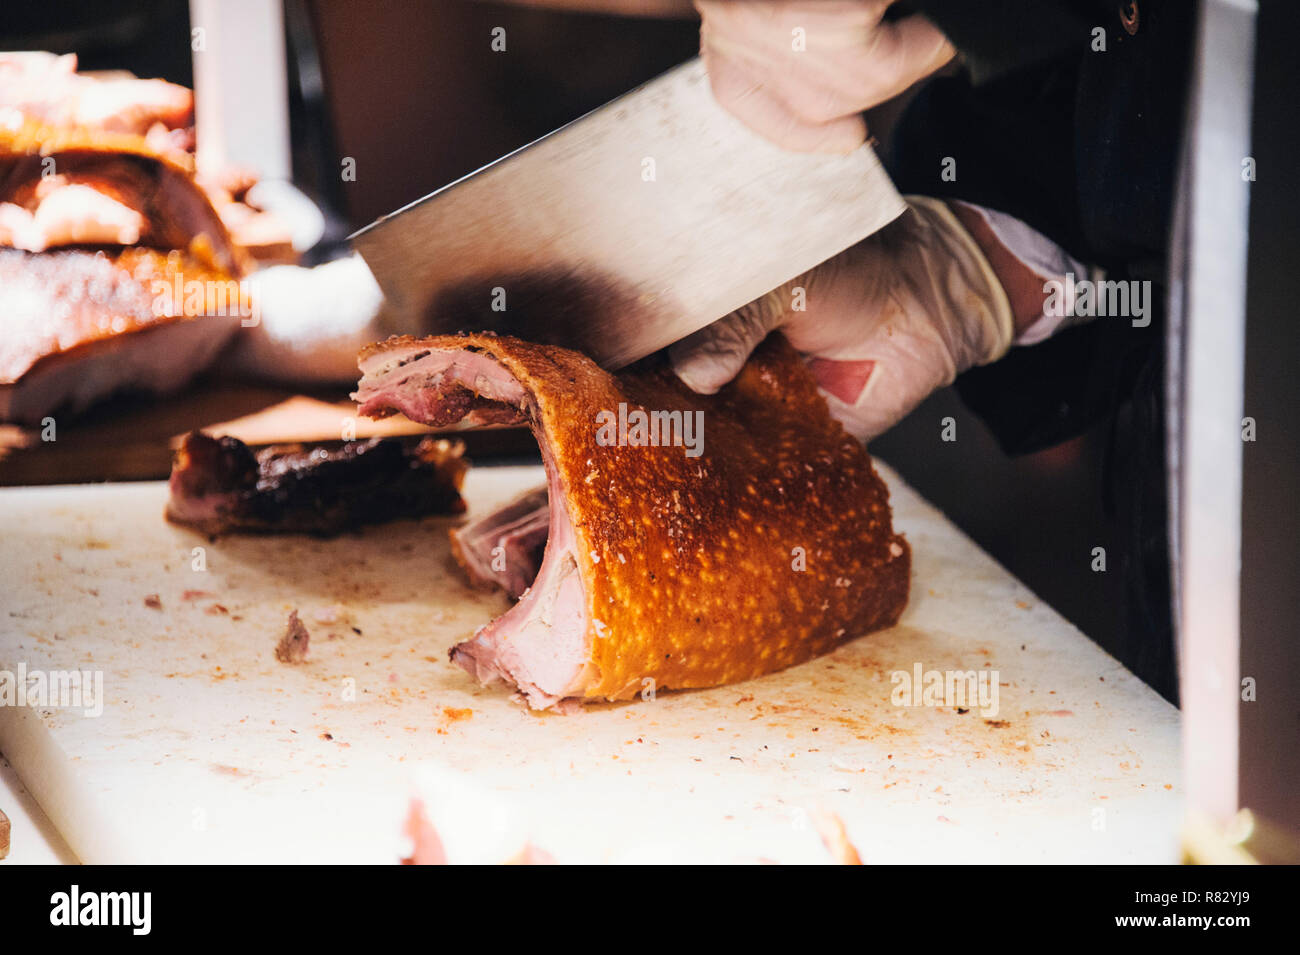 Close up view of hands chopping roast pig ribs with a large meat cleaver Stock Photo